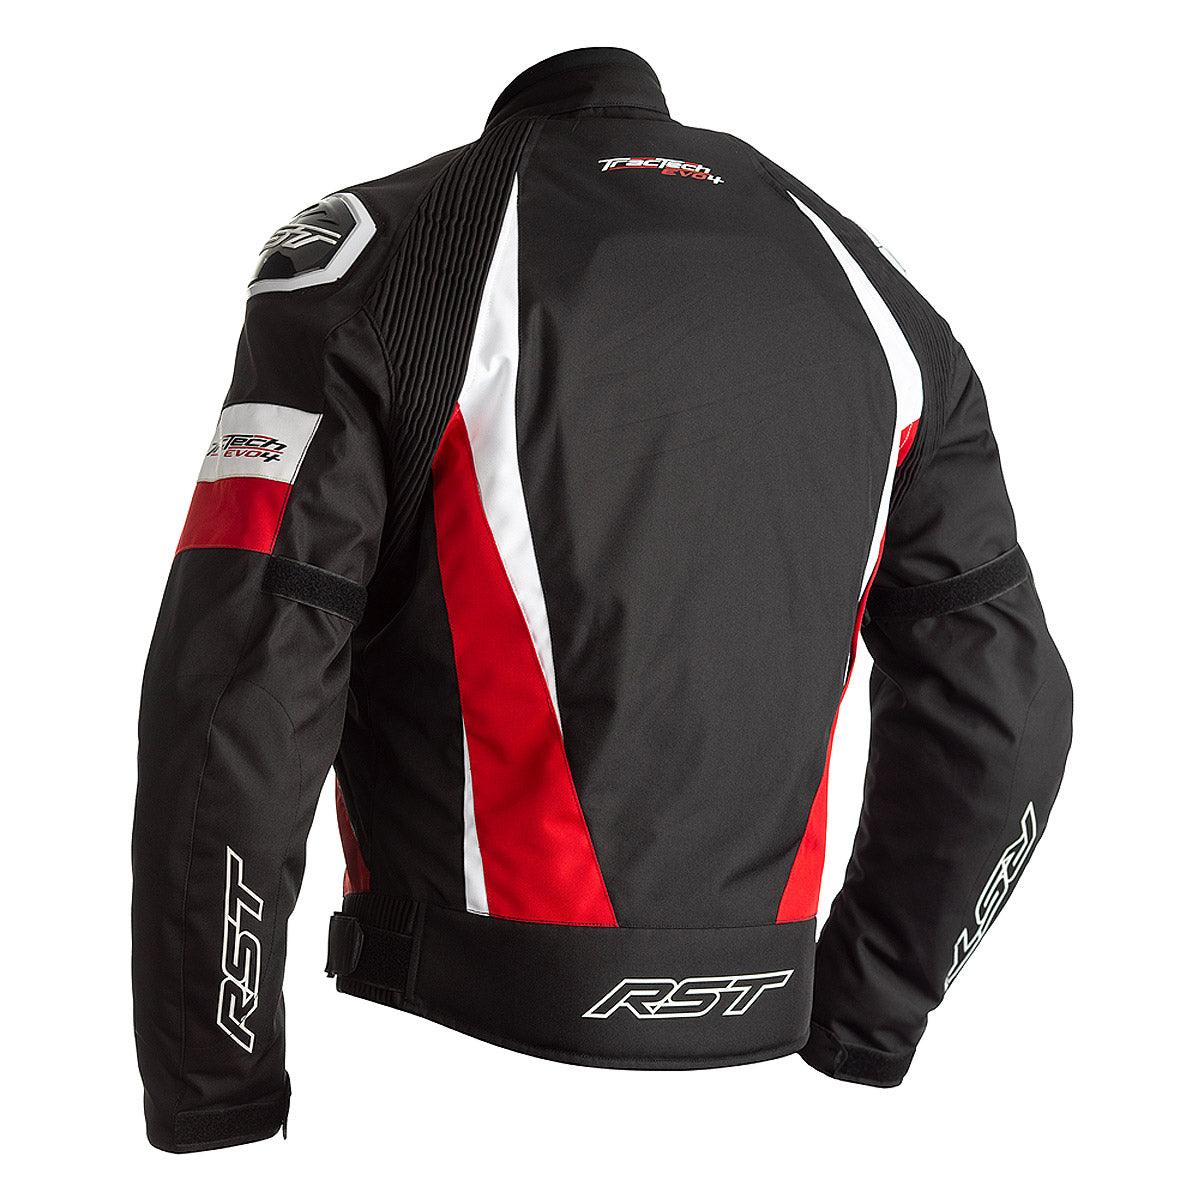 RST Tractech Evo 4 Textile Jacket CE WP Black Red - Motorcycle Clothing